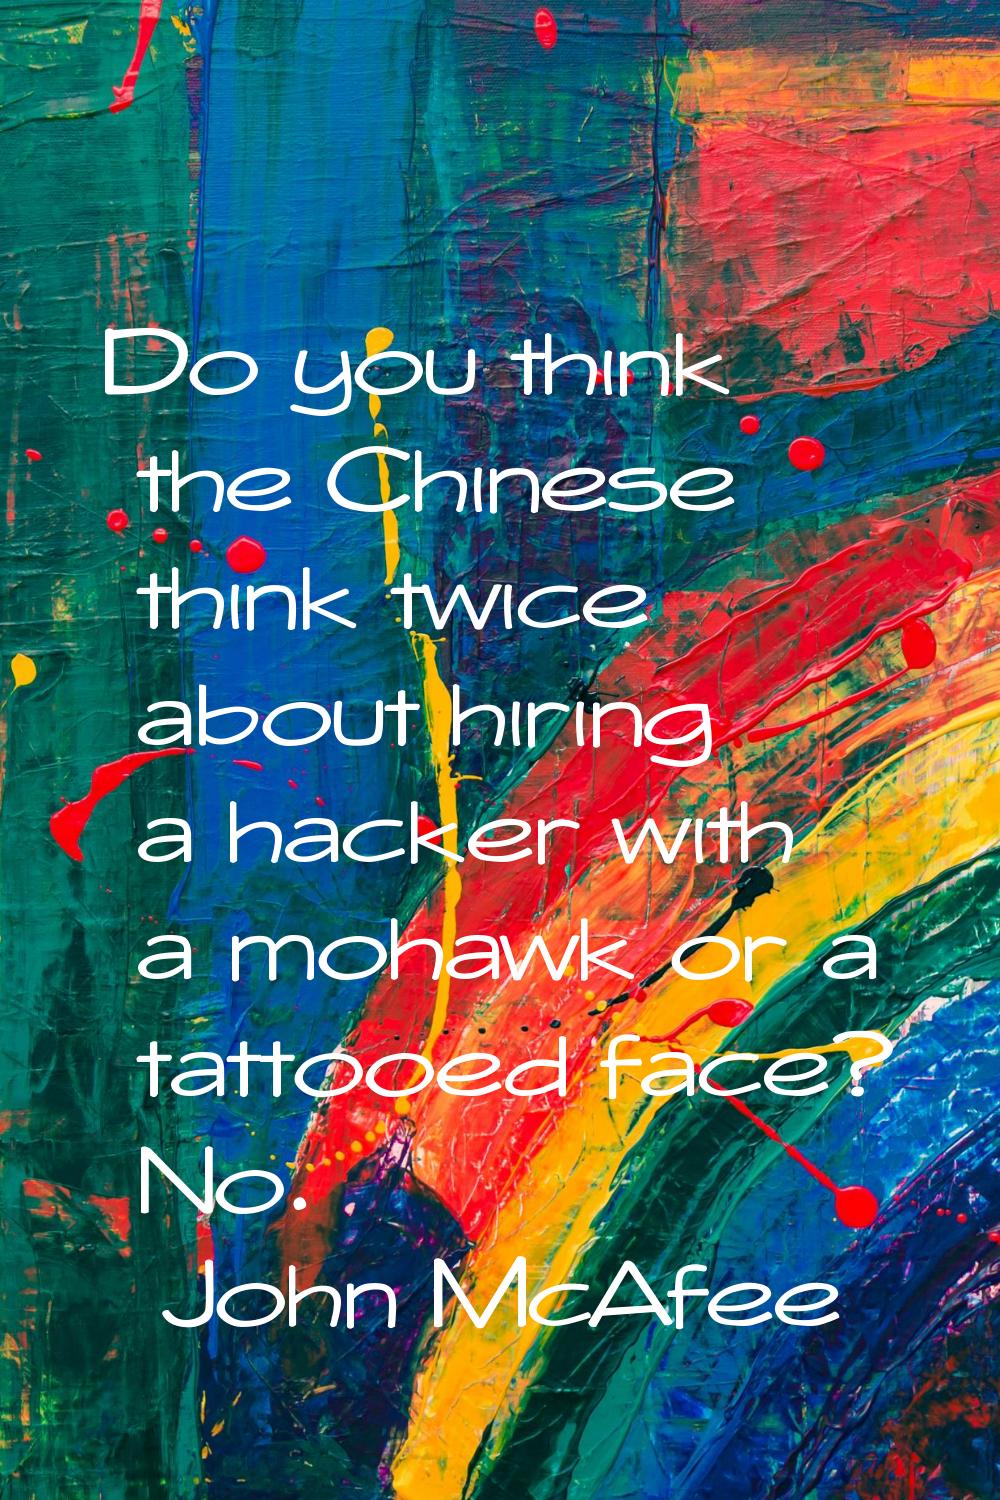 Do you think the Chinese think twice about hiring a hacker with a mohawk or a tattooed face? No.